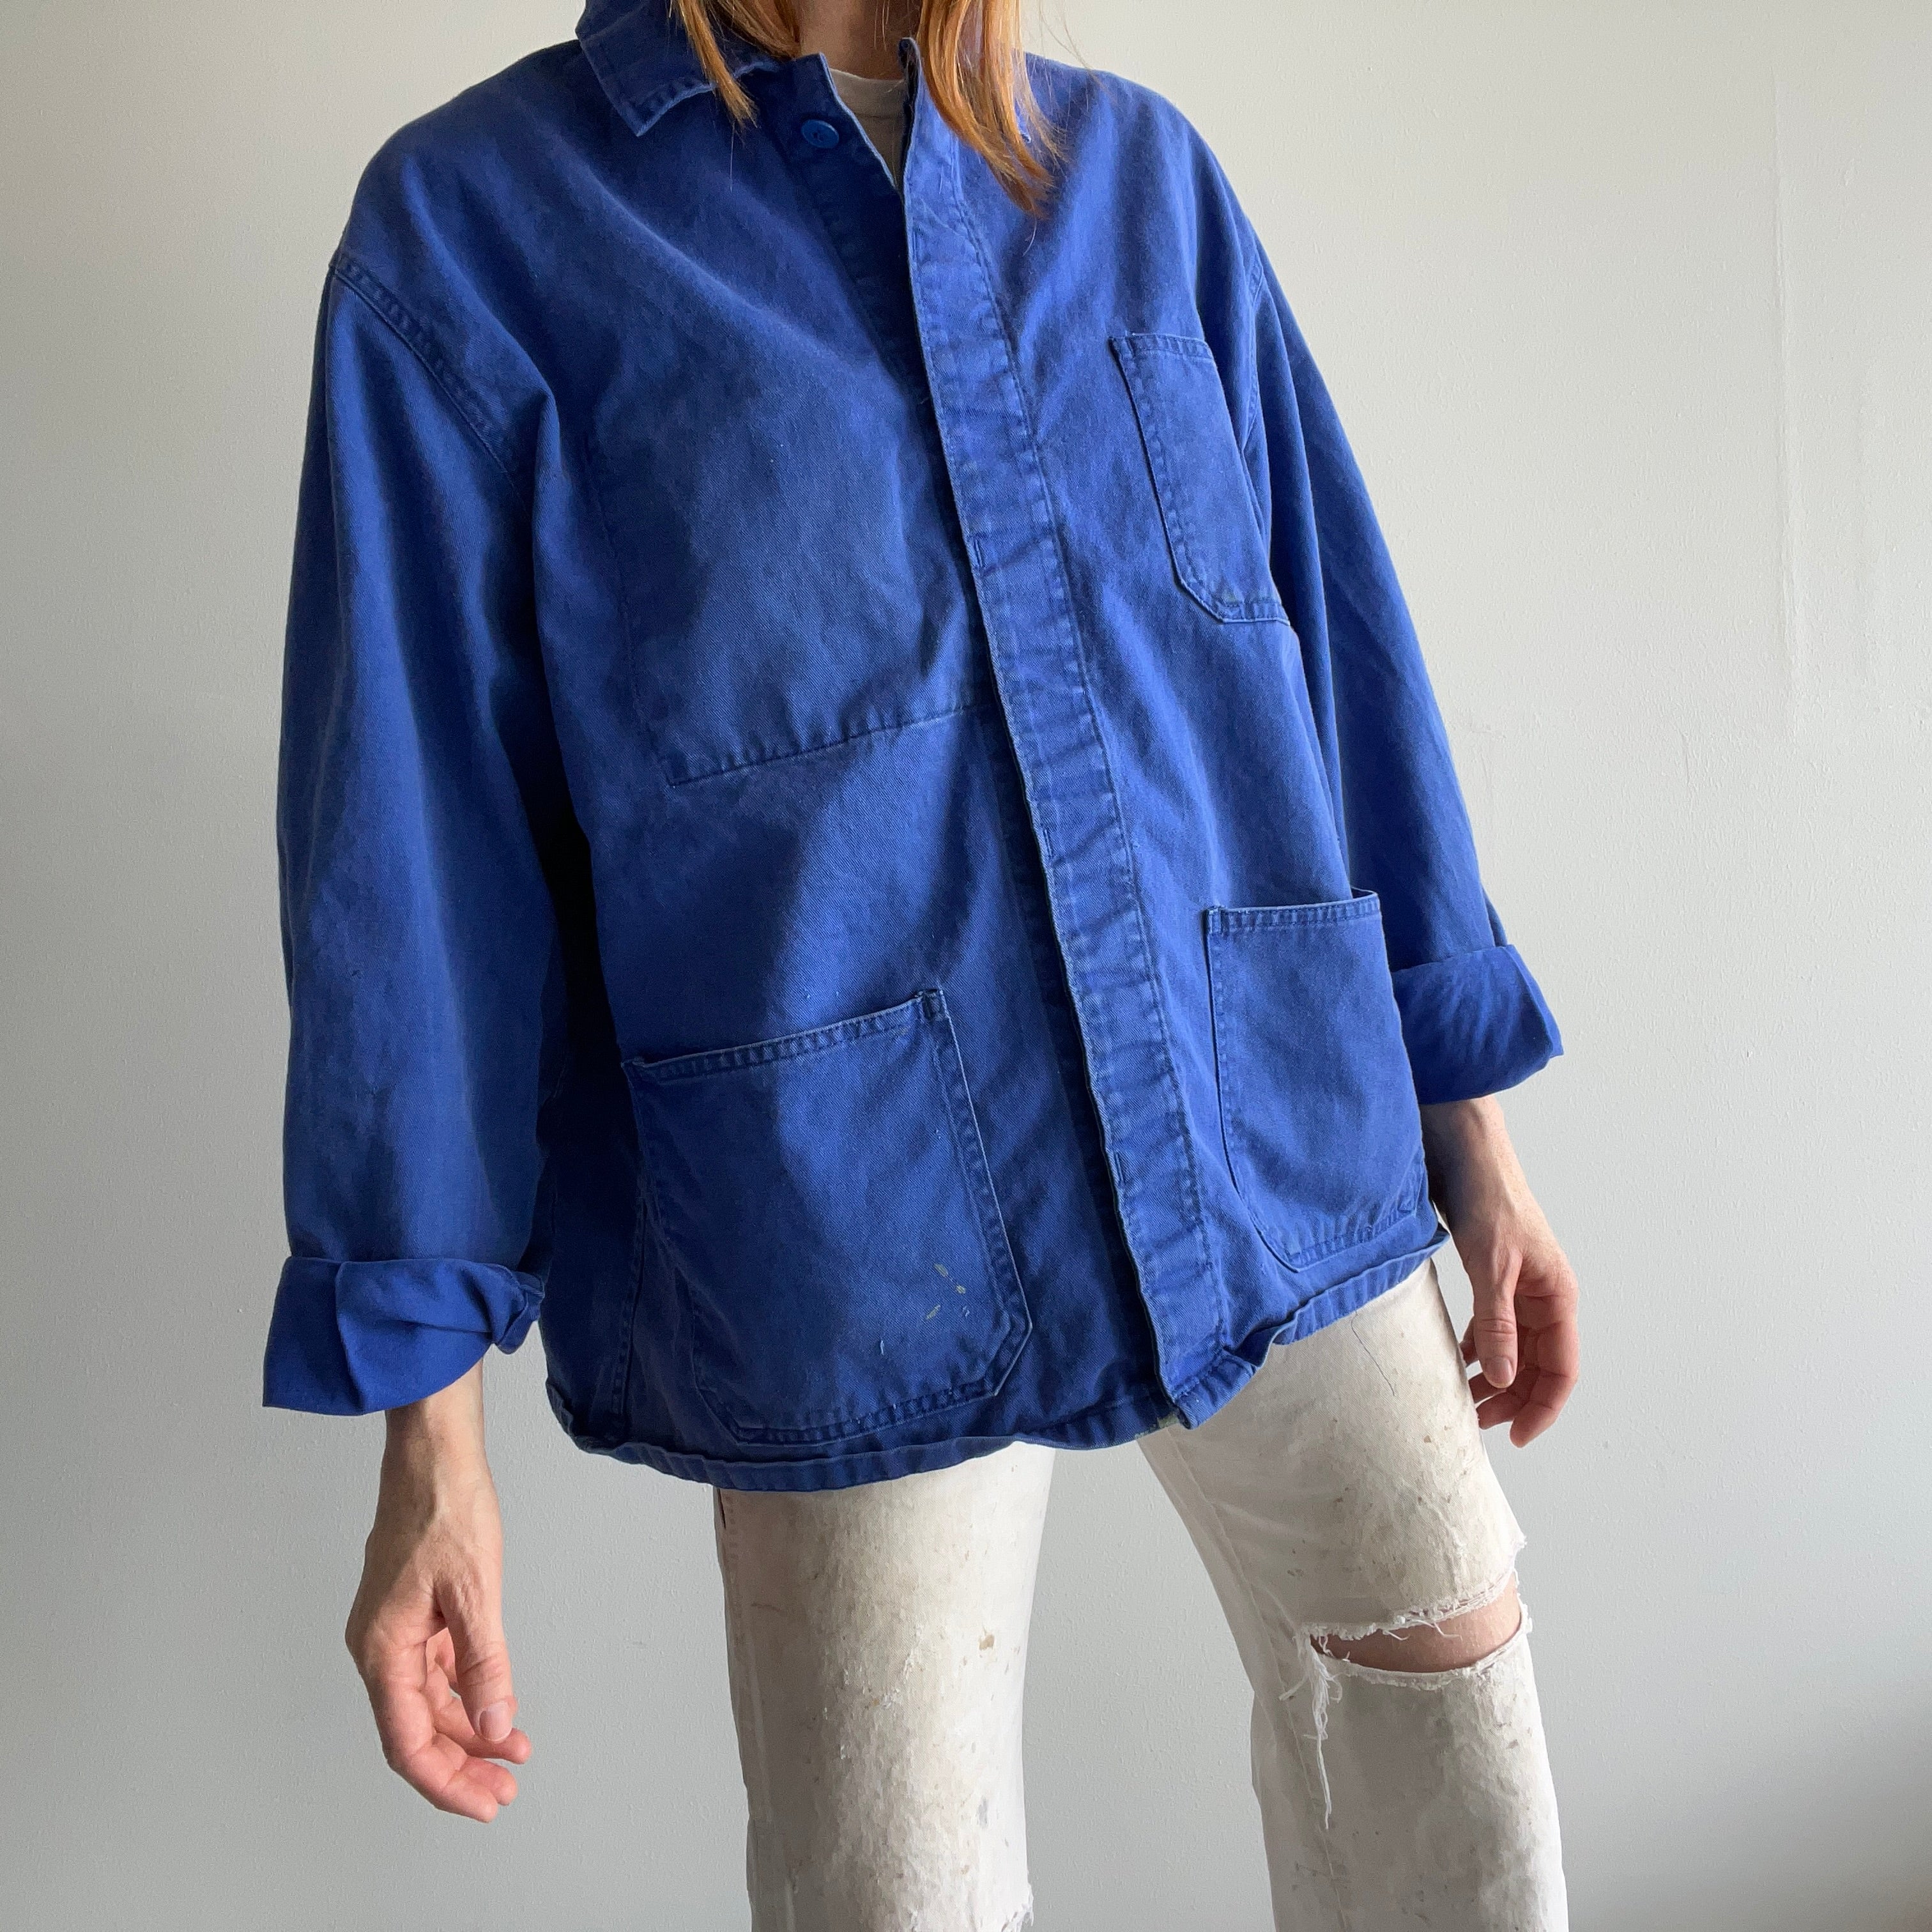 The French Chore Coat – Put This On